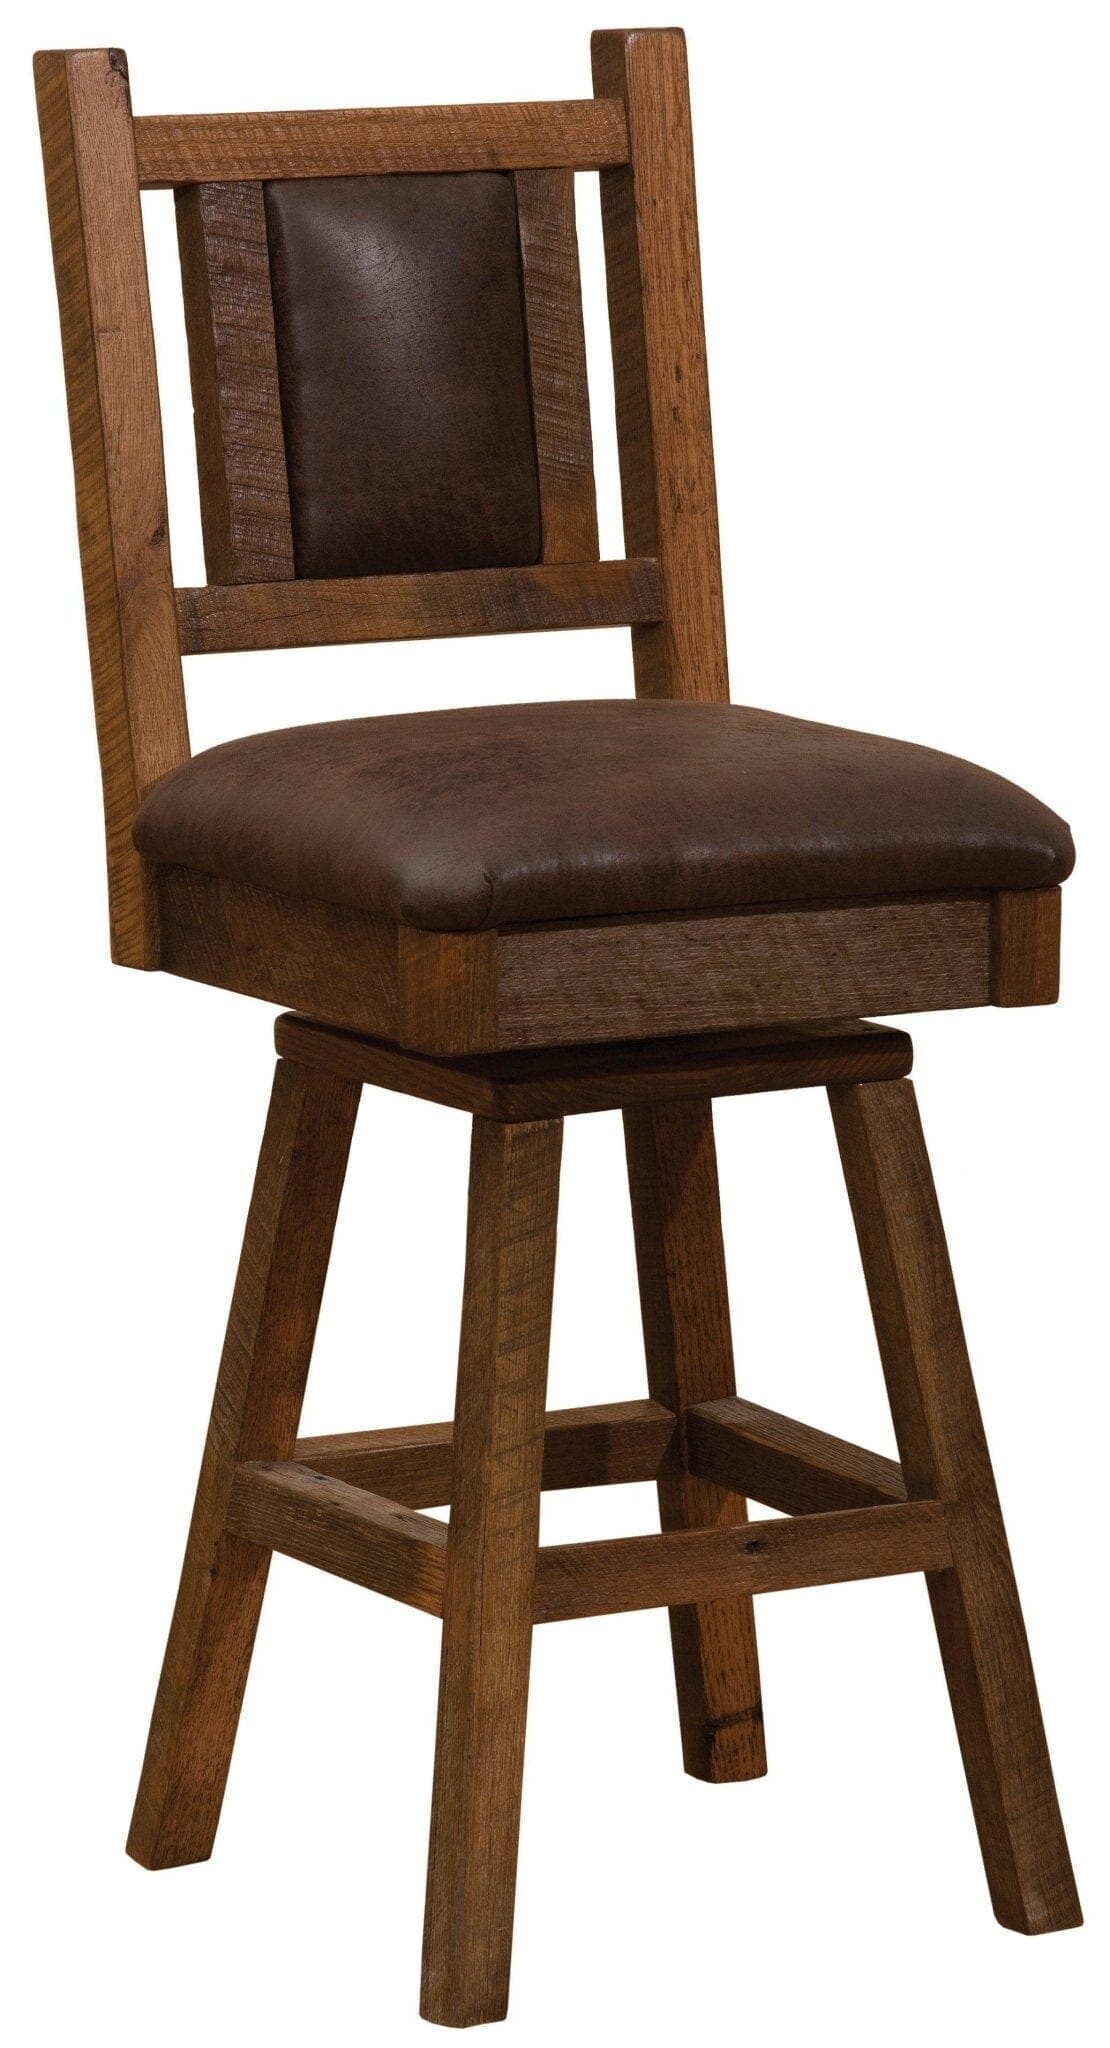 Barnwood Swivel Upholstered Counter Stool with Back - 24" Seat Height - Rustic Deco Incorporated